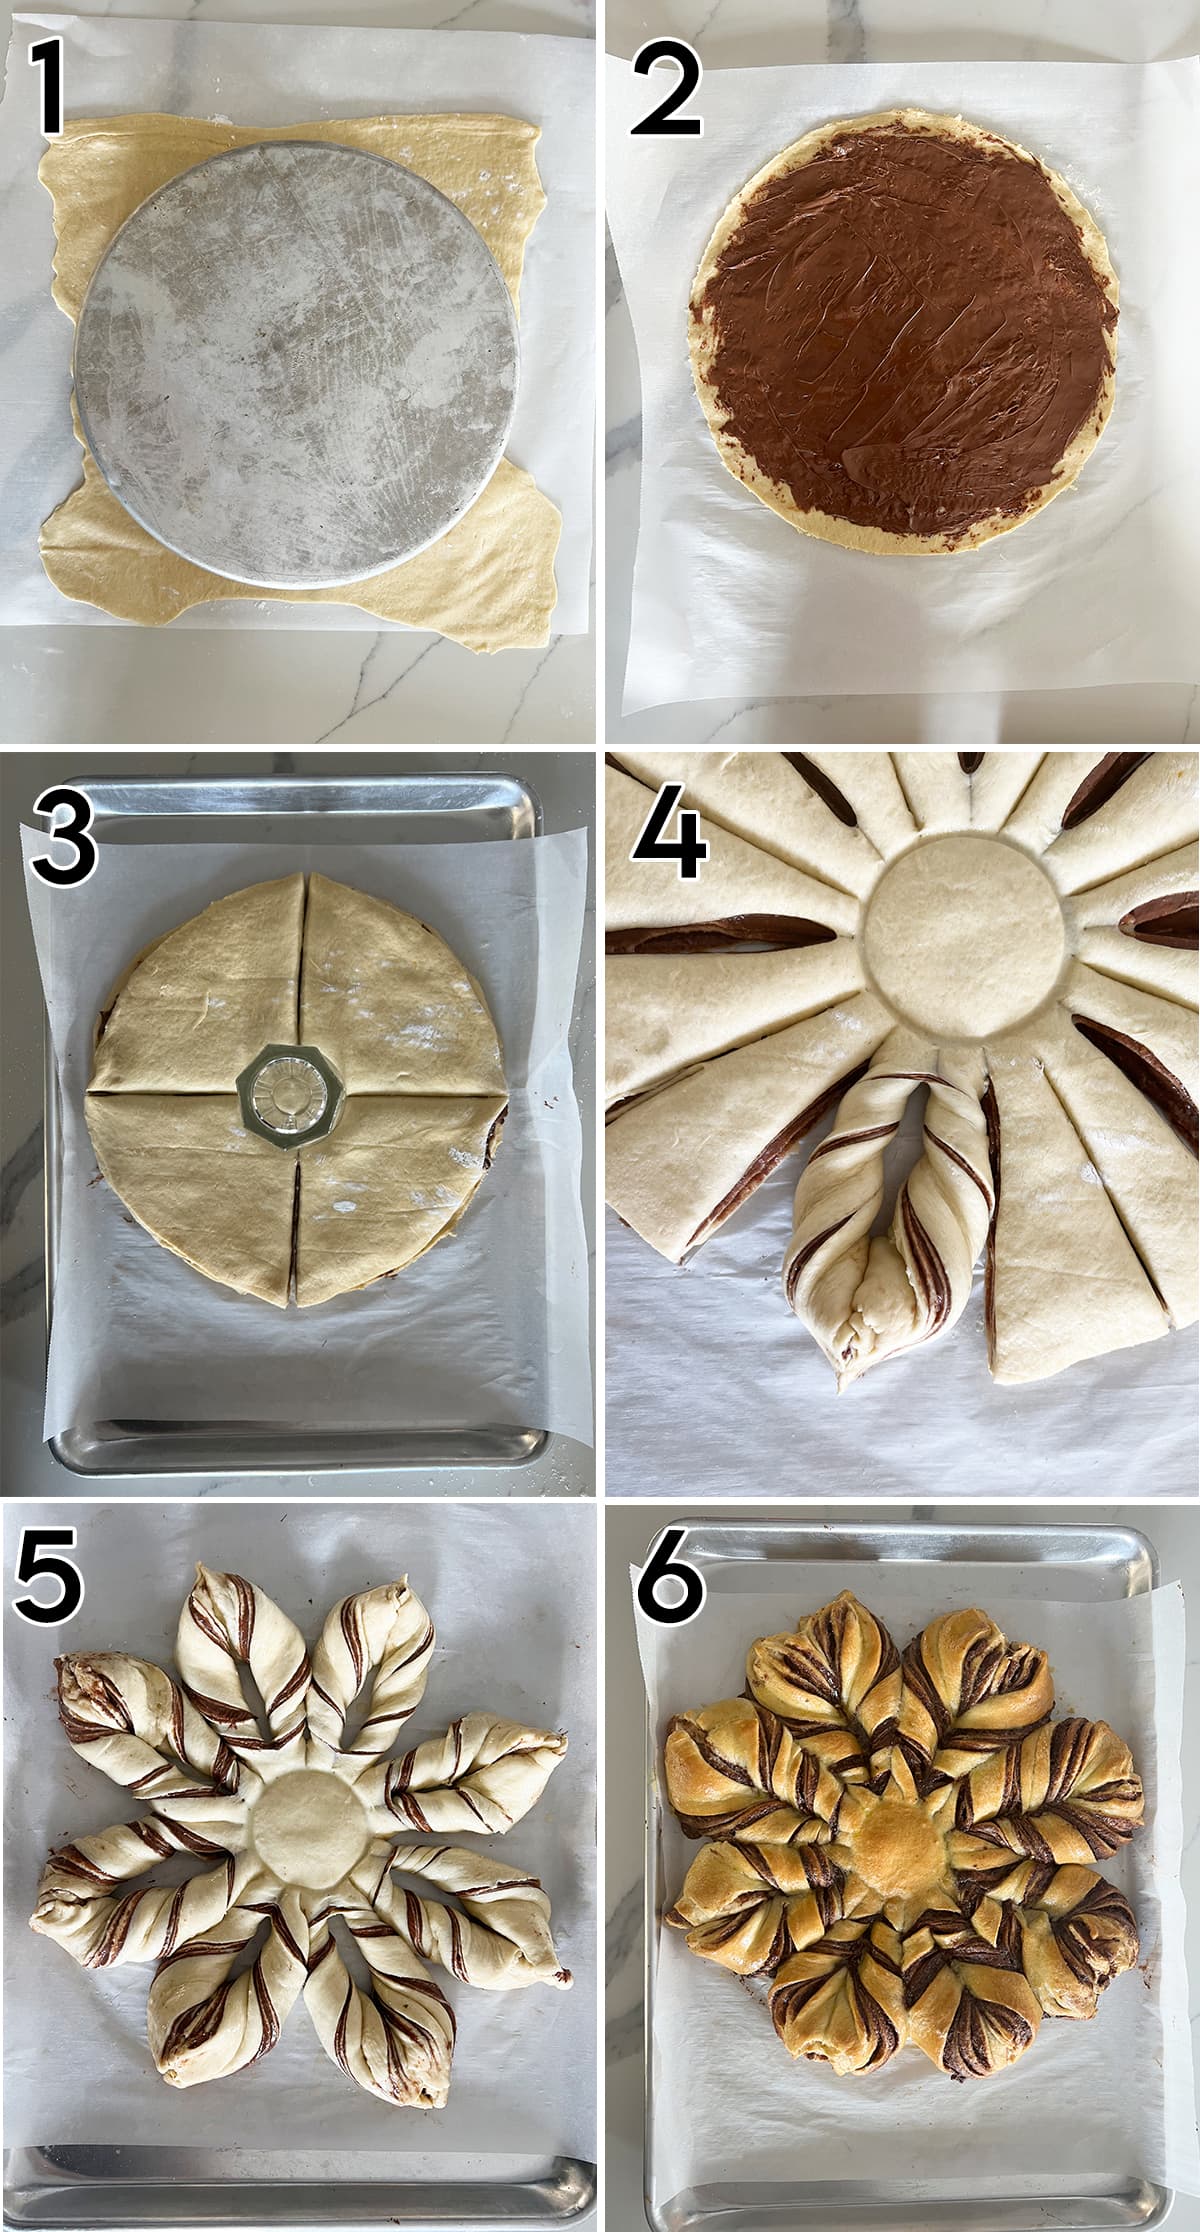 A collage of 6 photos showing how to make Nutella Star Bread.